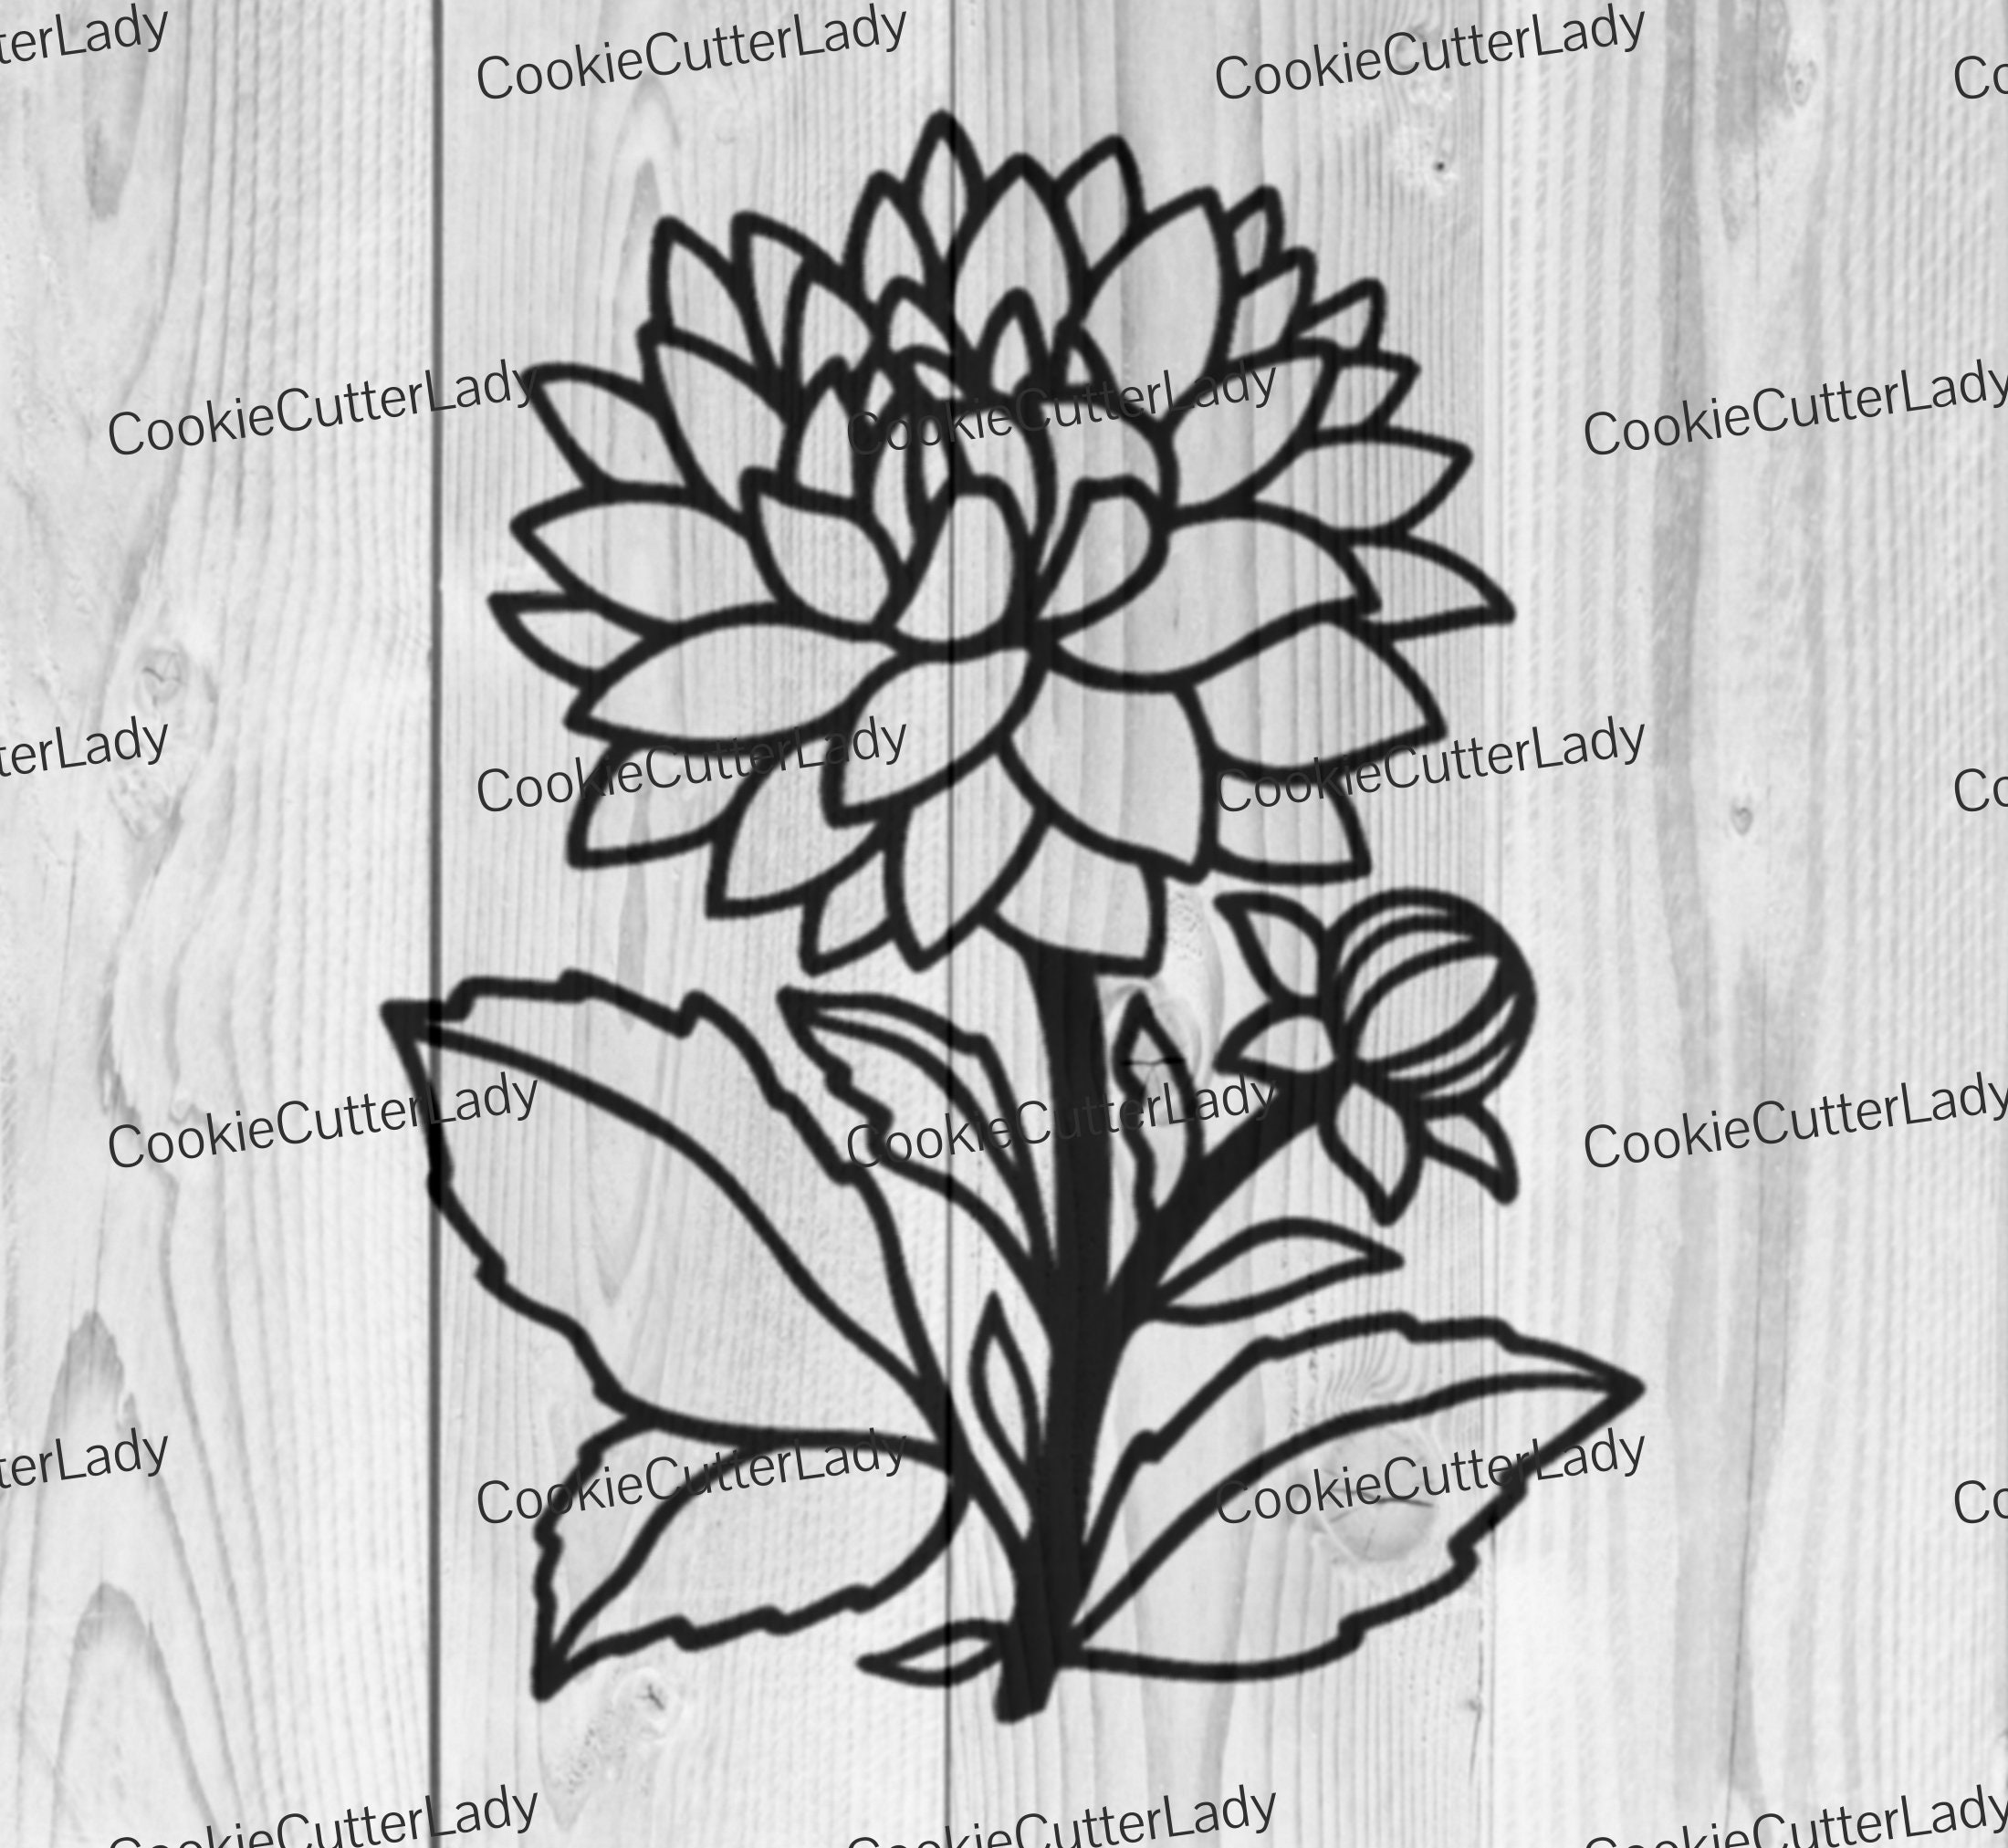 DAHLIA STENCIL for Painting on Furniture and Other Crafts. Reusable Plastic  Stencil by Stencil Up. Easy to Use Flower Stencil. C110 